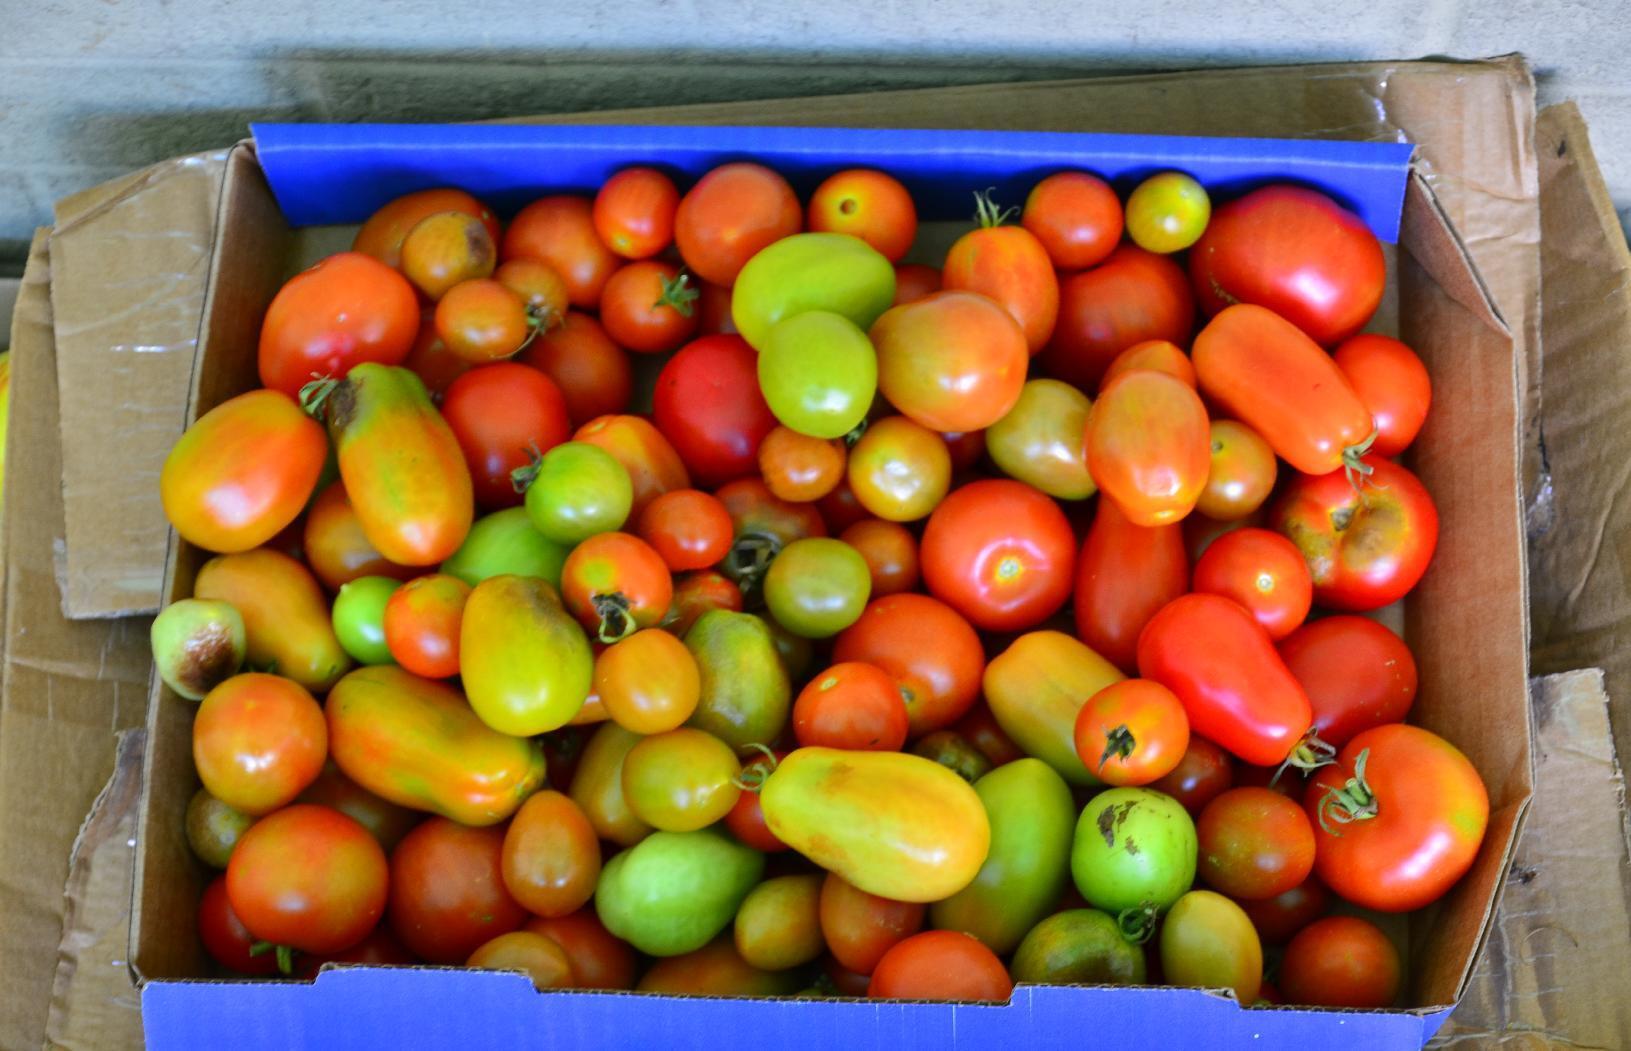 Tomatoes in a box